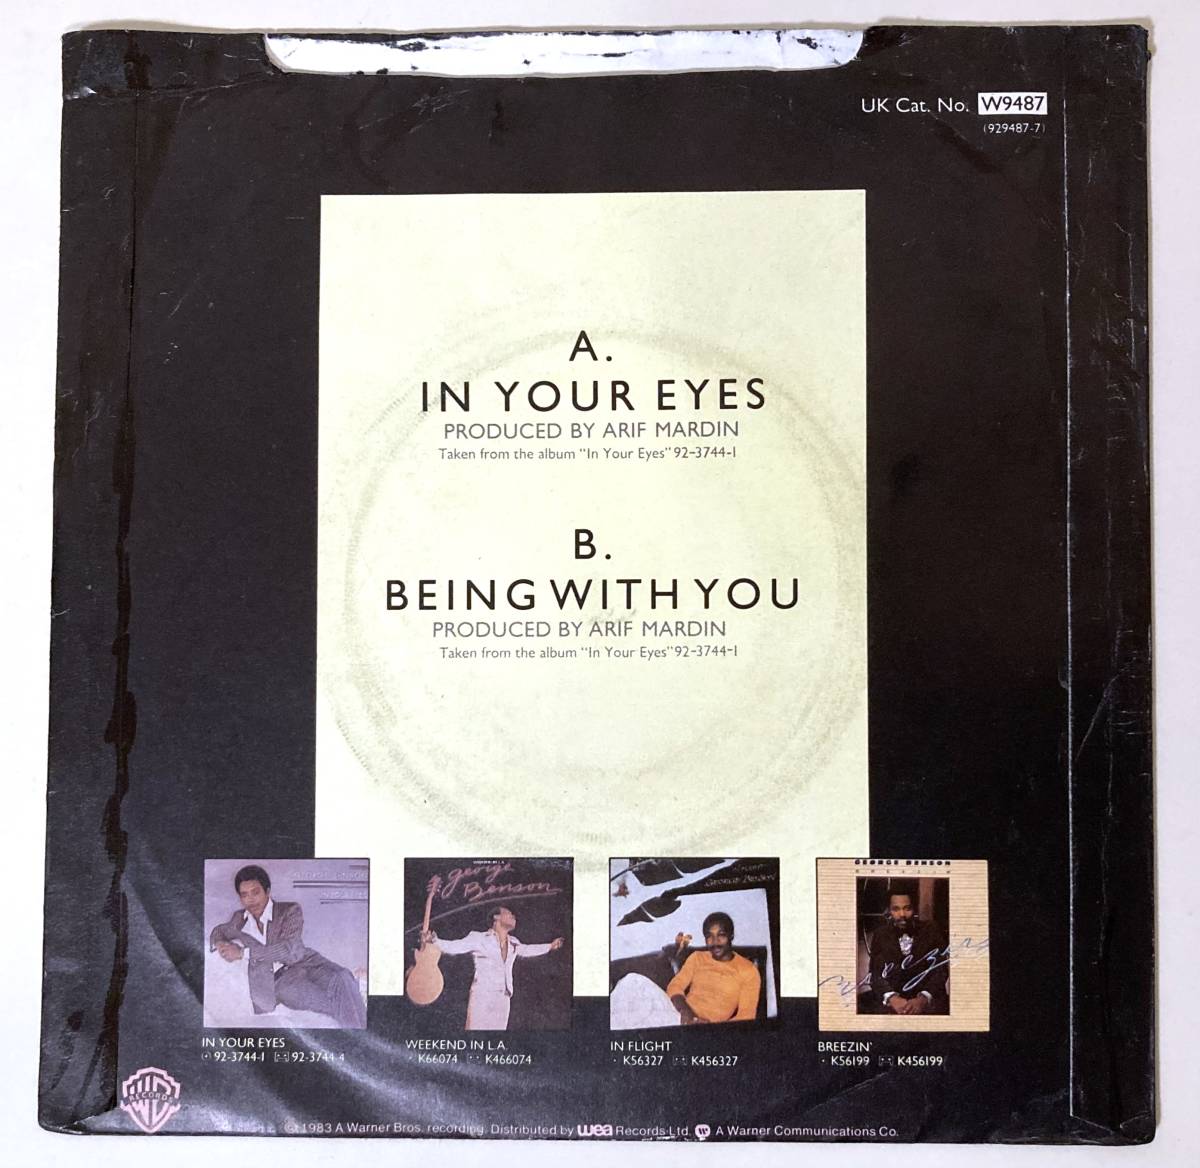 7inch★George Benson『In Your Eyes / Being With You』★Arif Mardin★Smooth Jazz, Soul★45 EP_画像3